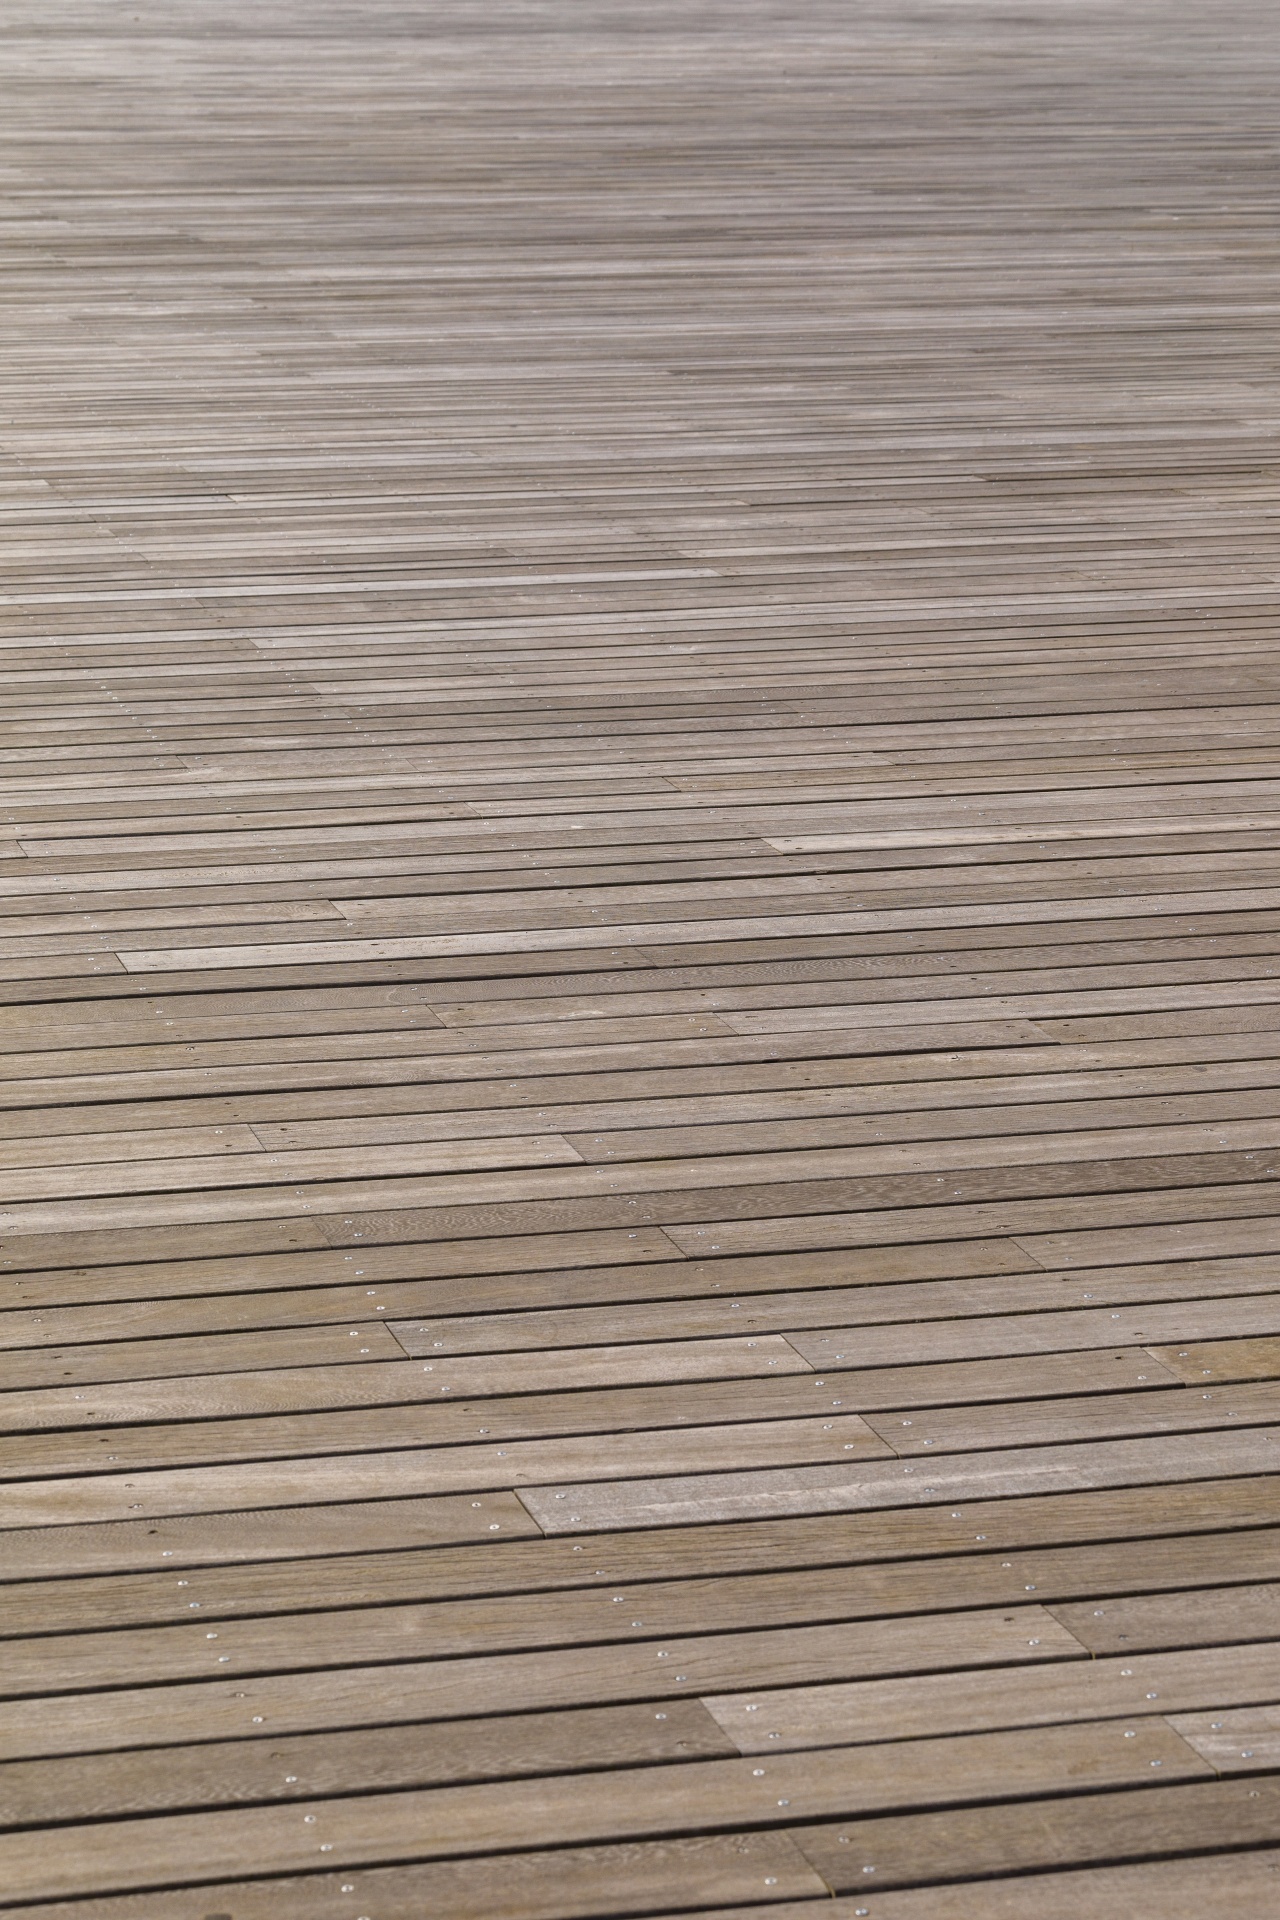 Wooden deck outside texture background